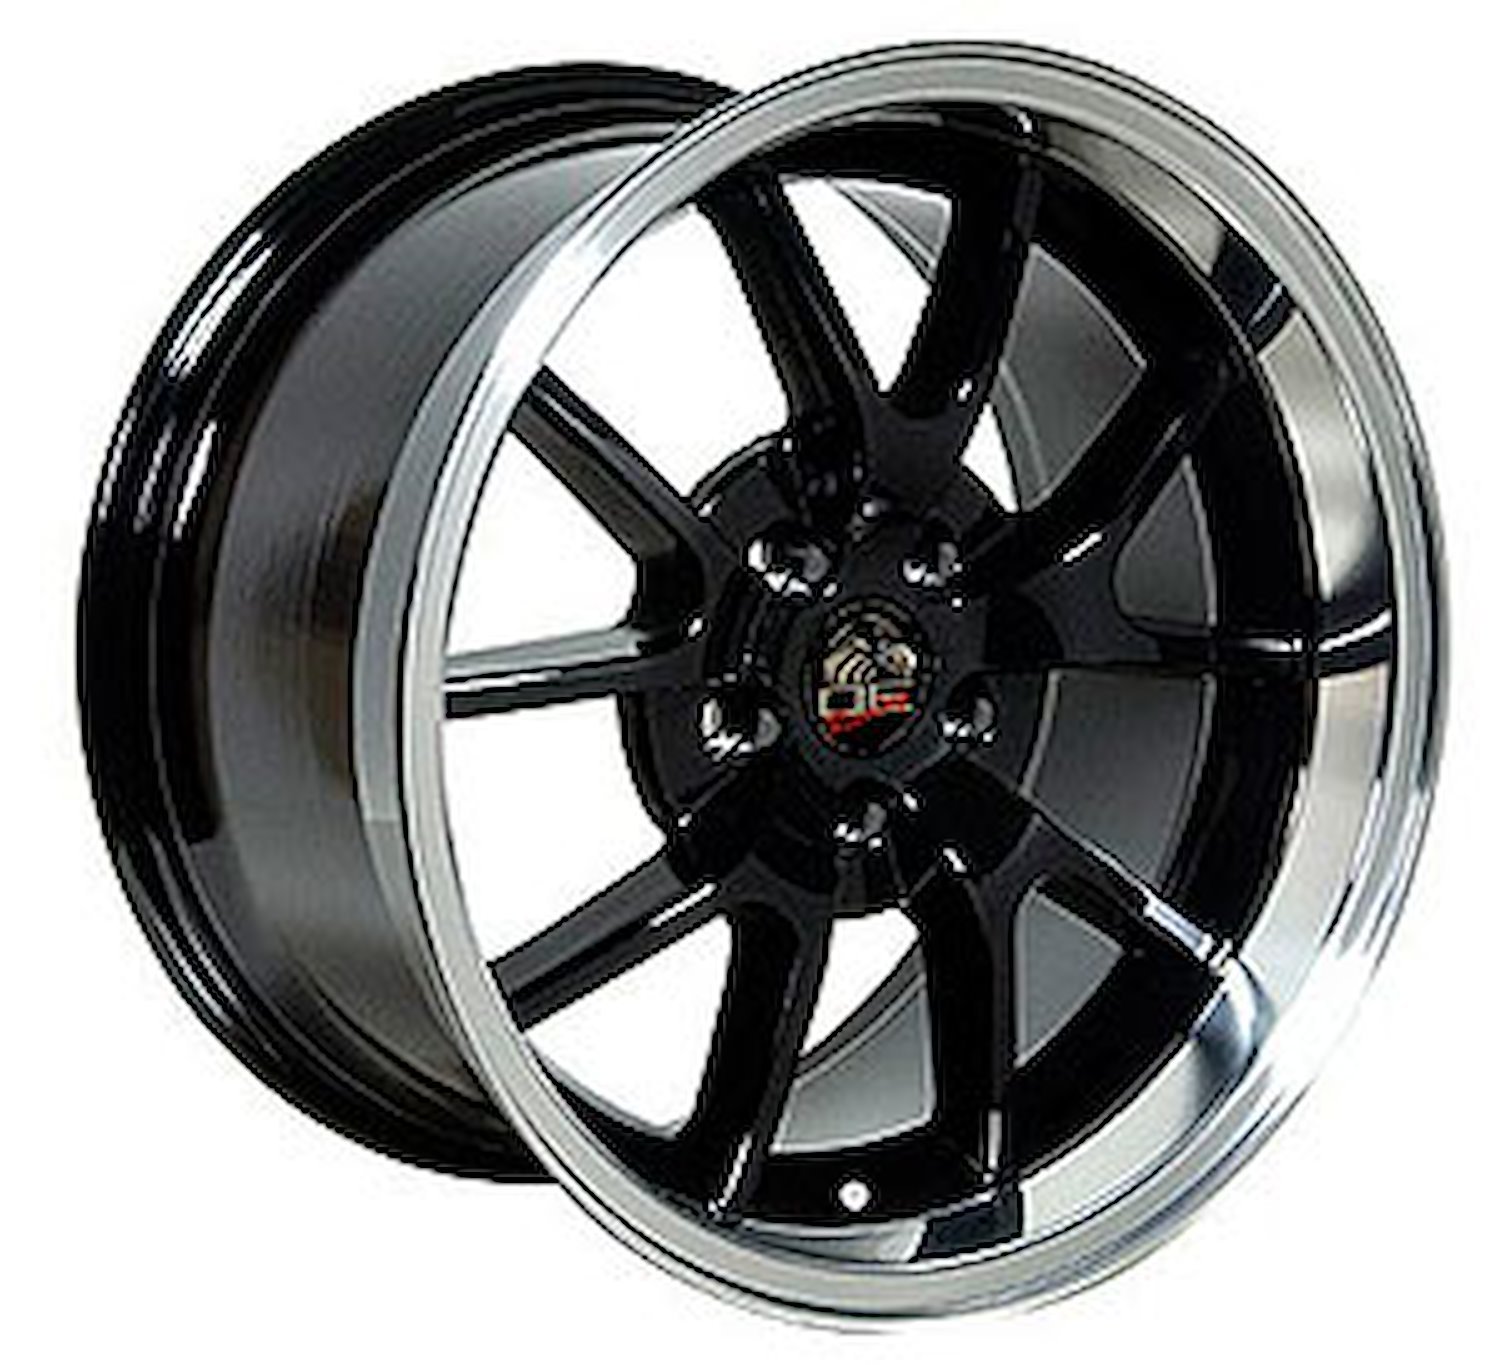 Mustang FR500 Style Wheel Size: 18" x 10" Bolt Pattern: 5 x 114.3 Rear Spacing: 6.37" Offset: +22mm